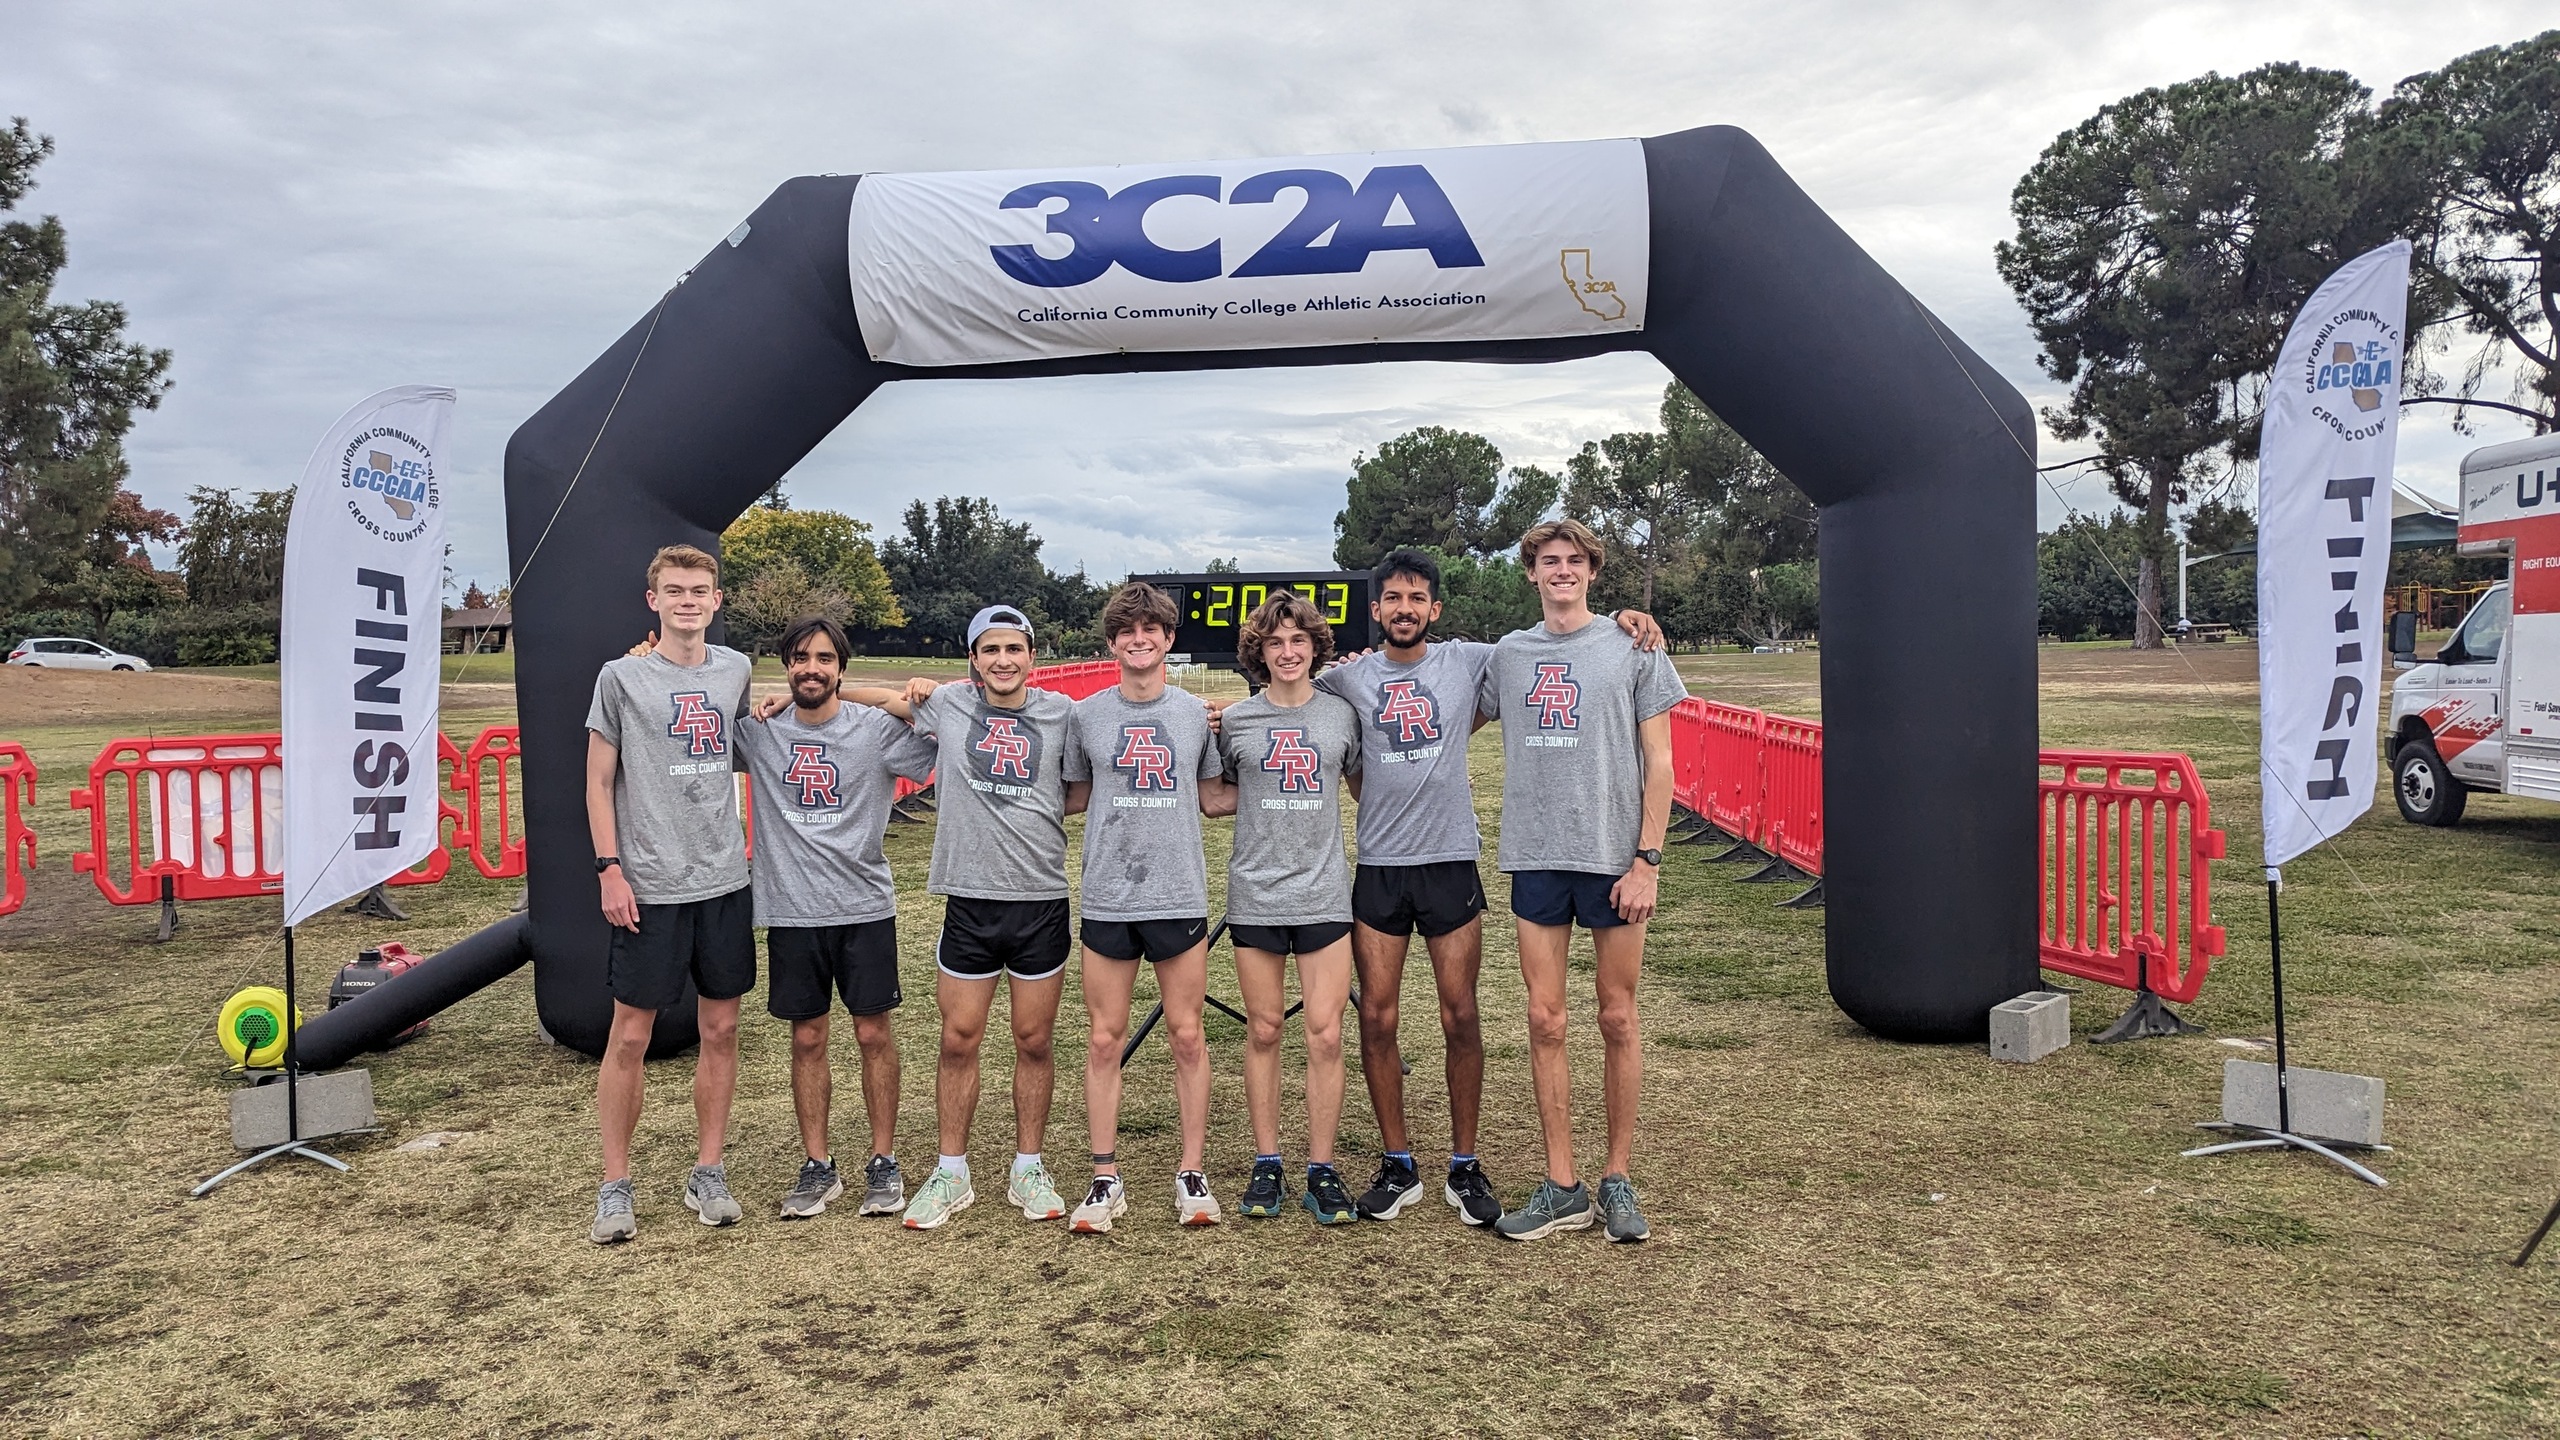 ARC Men's Cross Country Takes 7th Place at the 3C2A State Championships. 19th Top 10 in 20 Years!!